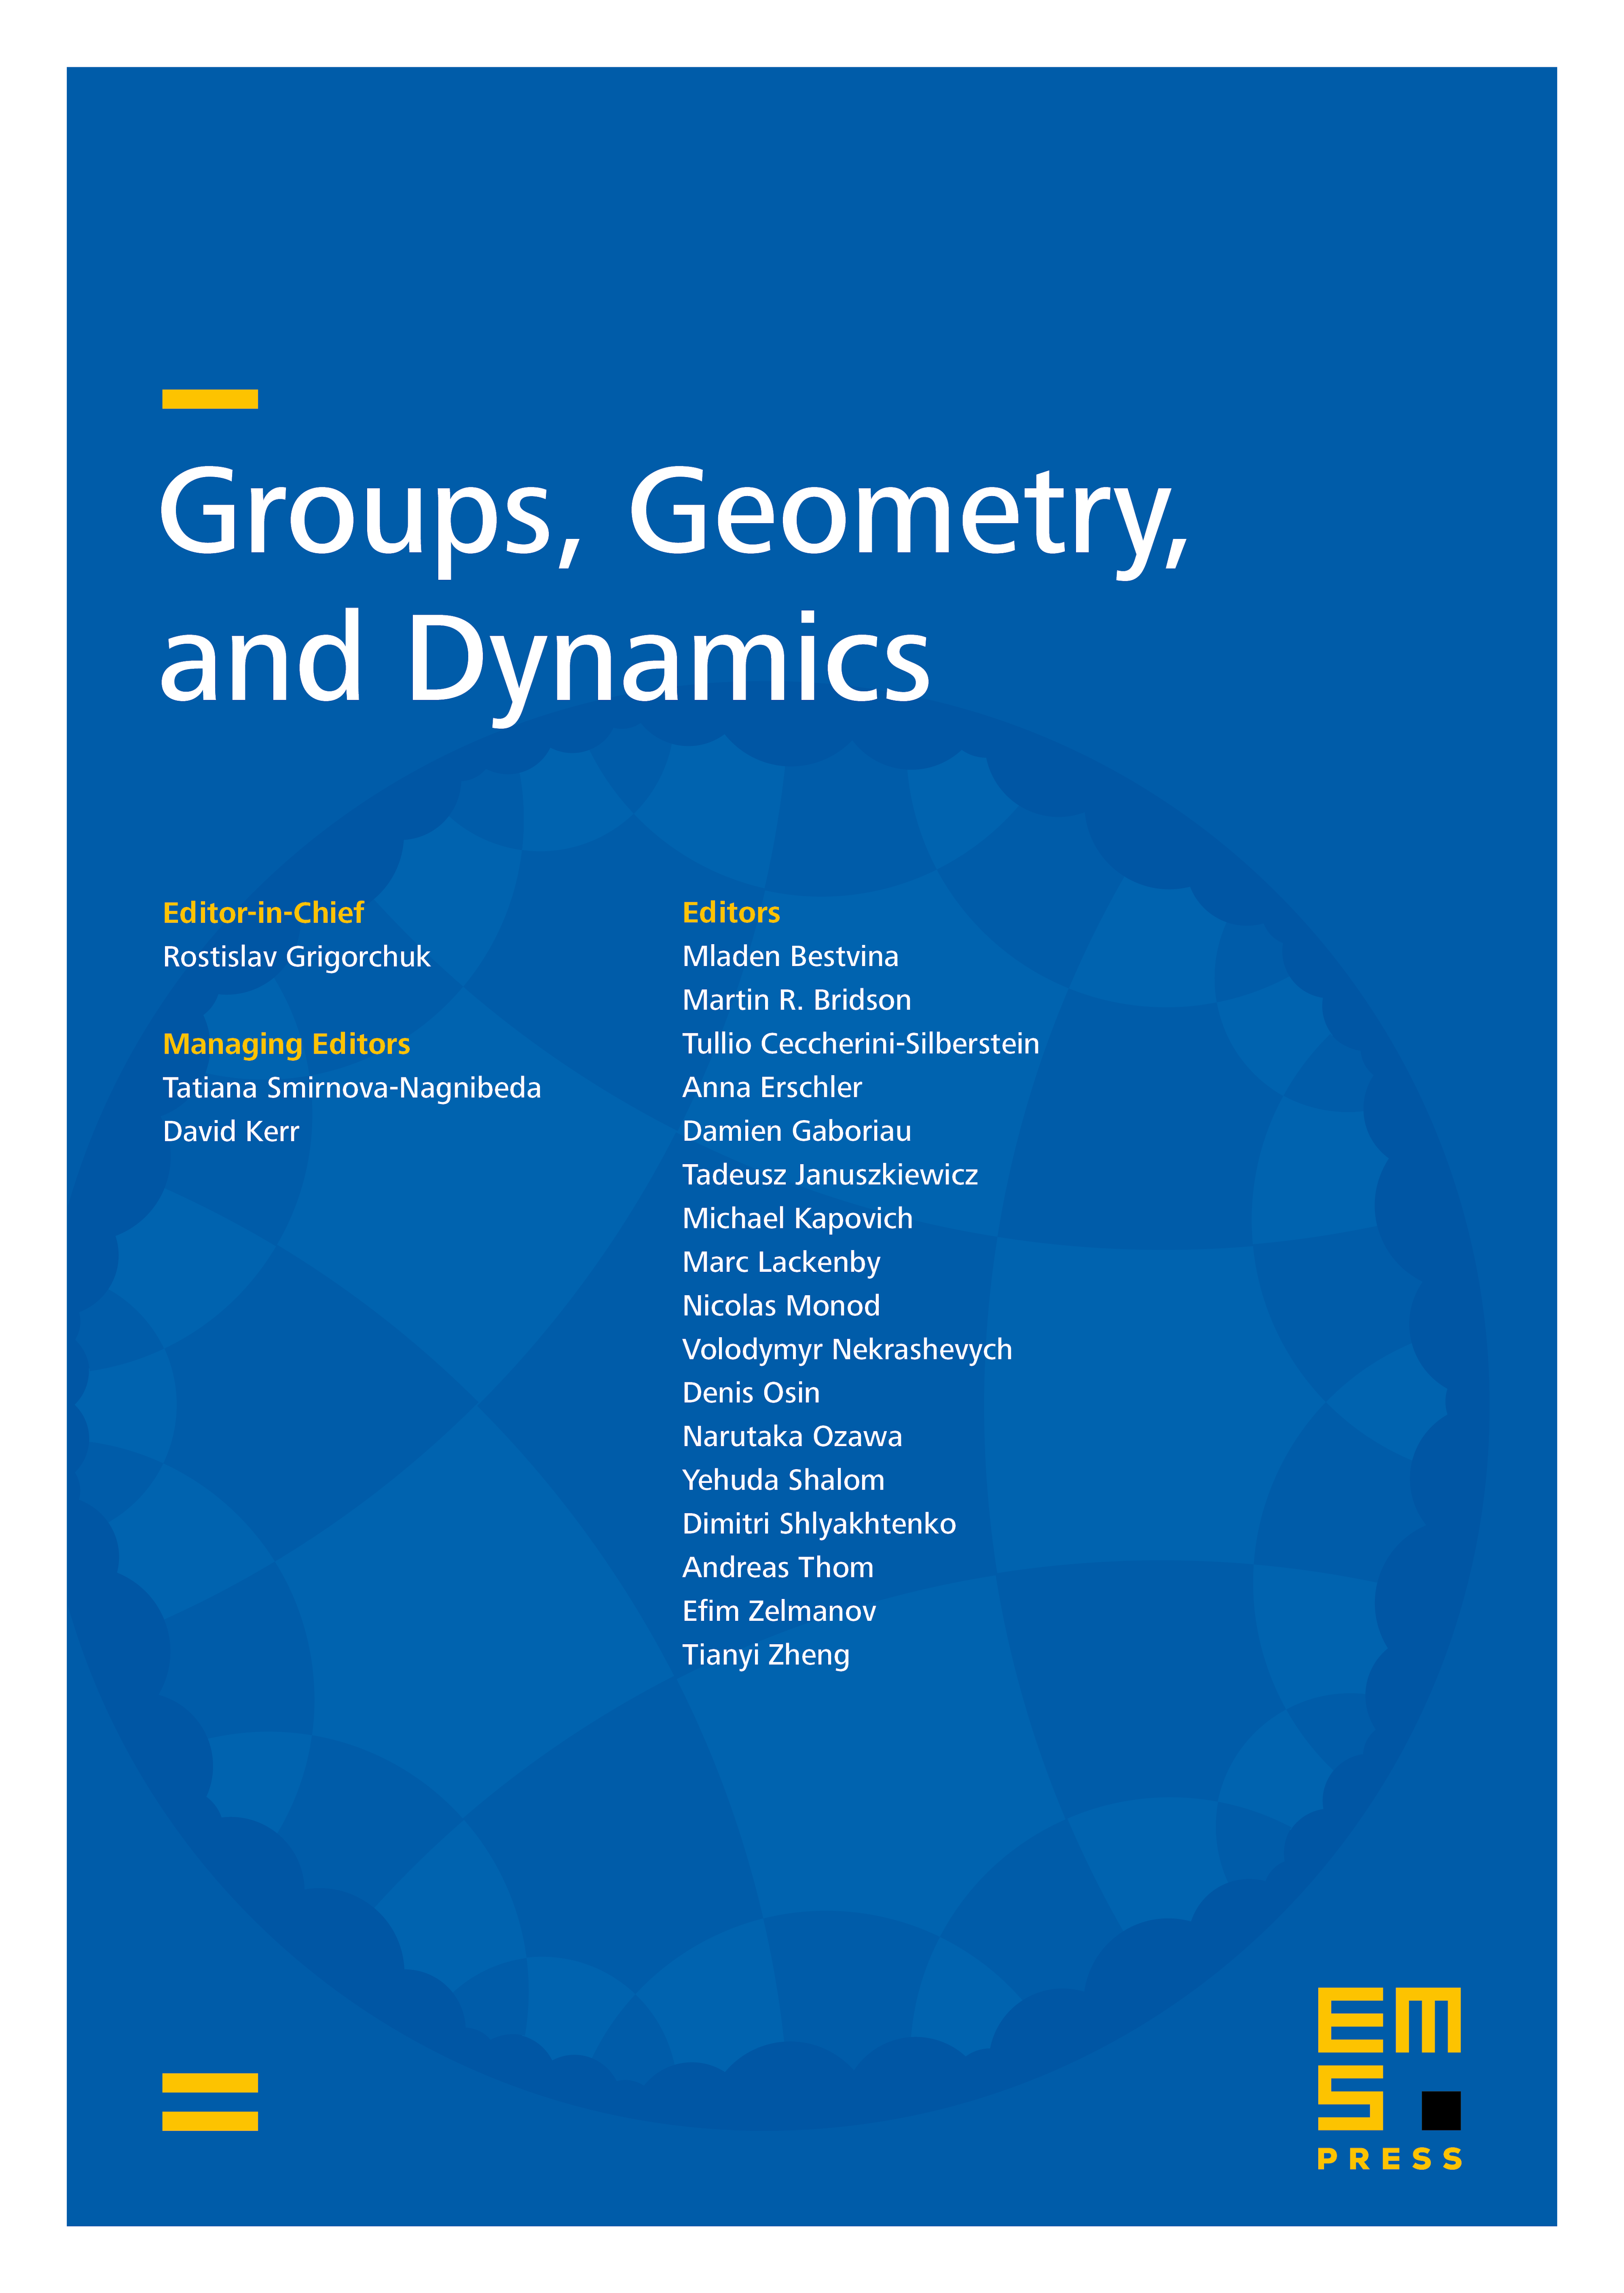 Virtual endomorphisms of nilpotent groups cover